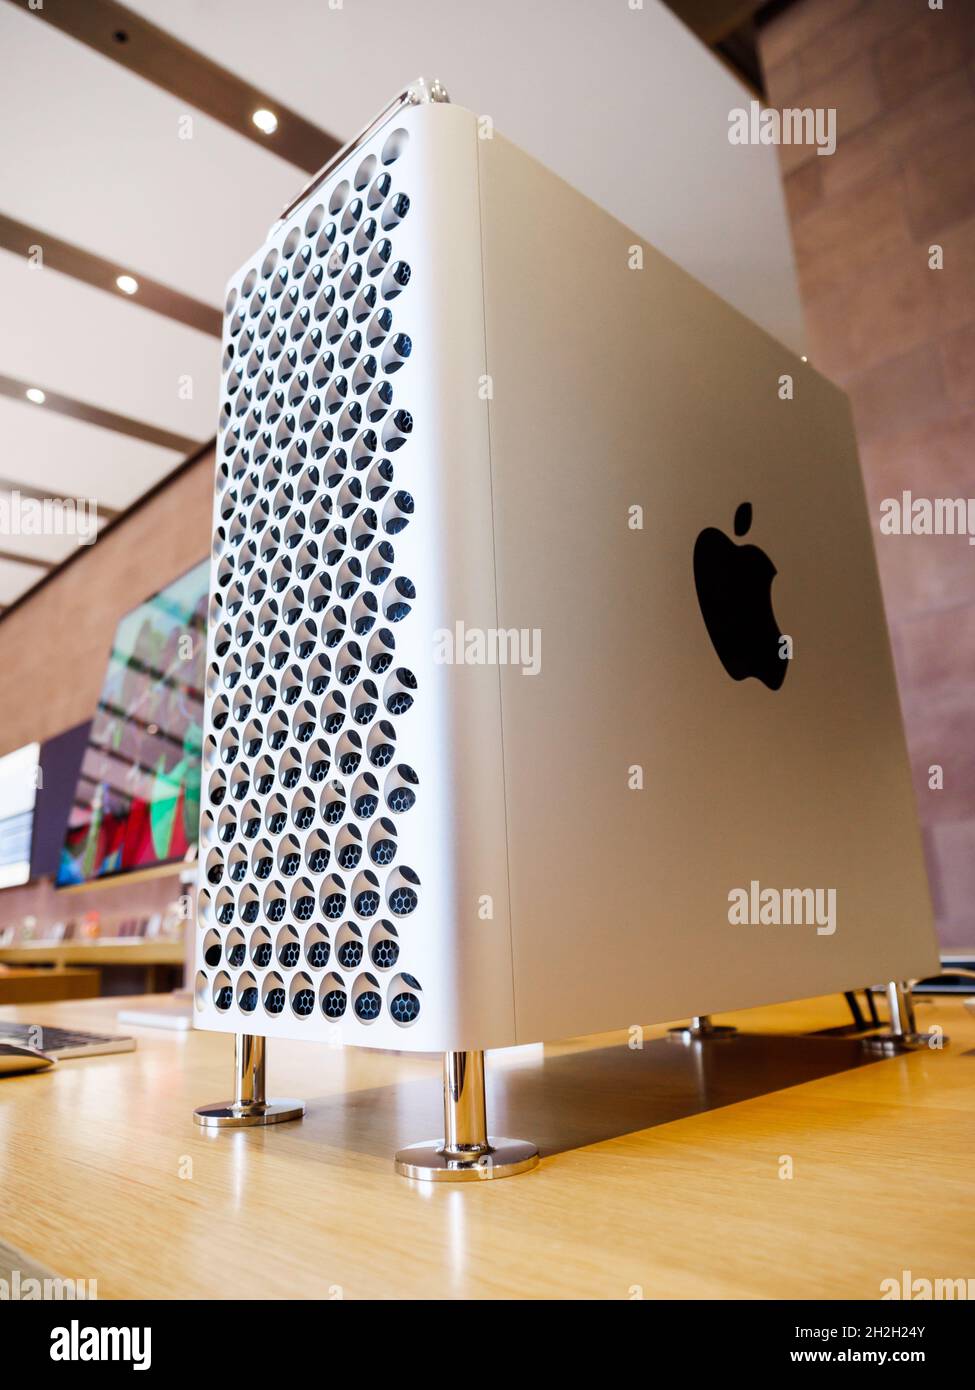 https://c8.alamy.com/comp/2H2H24Y/apple-mac-pro-workstation-computer-in-apple-store-also-known-as-the-cheese-grater-2H2H24Y.jpg